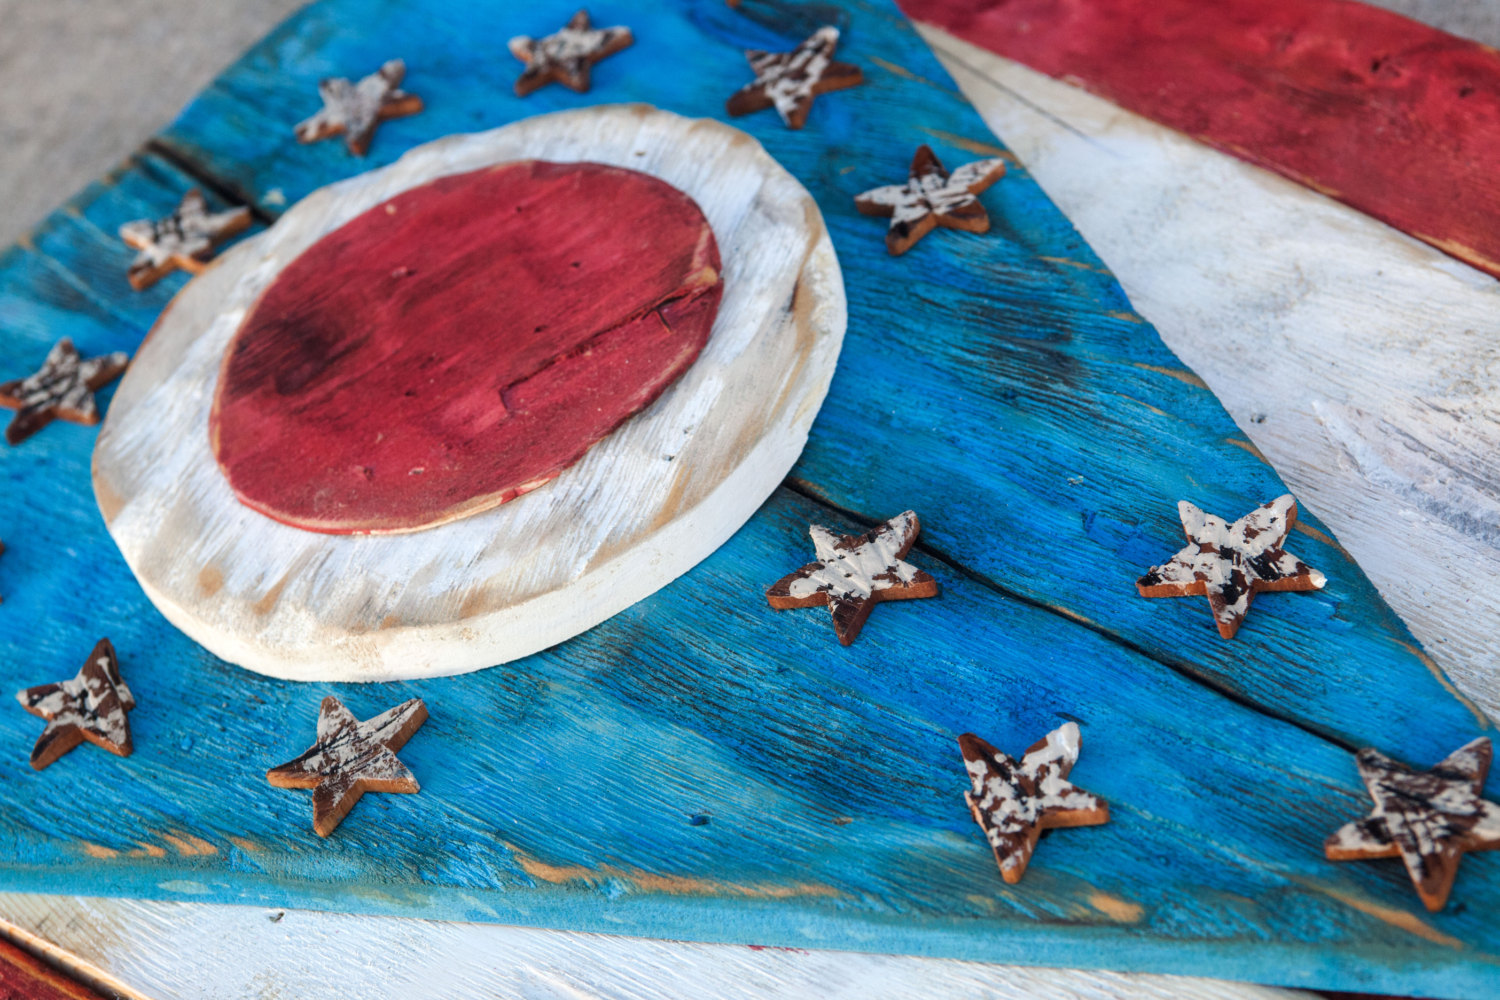 Weathered Wood One of a kind 3D Ohio Flag, Wooden, vintage, art, distressed, Cincinnati, Blue, Cleveland, red